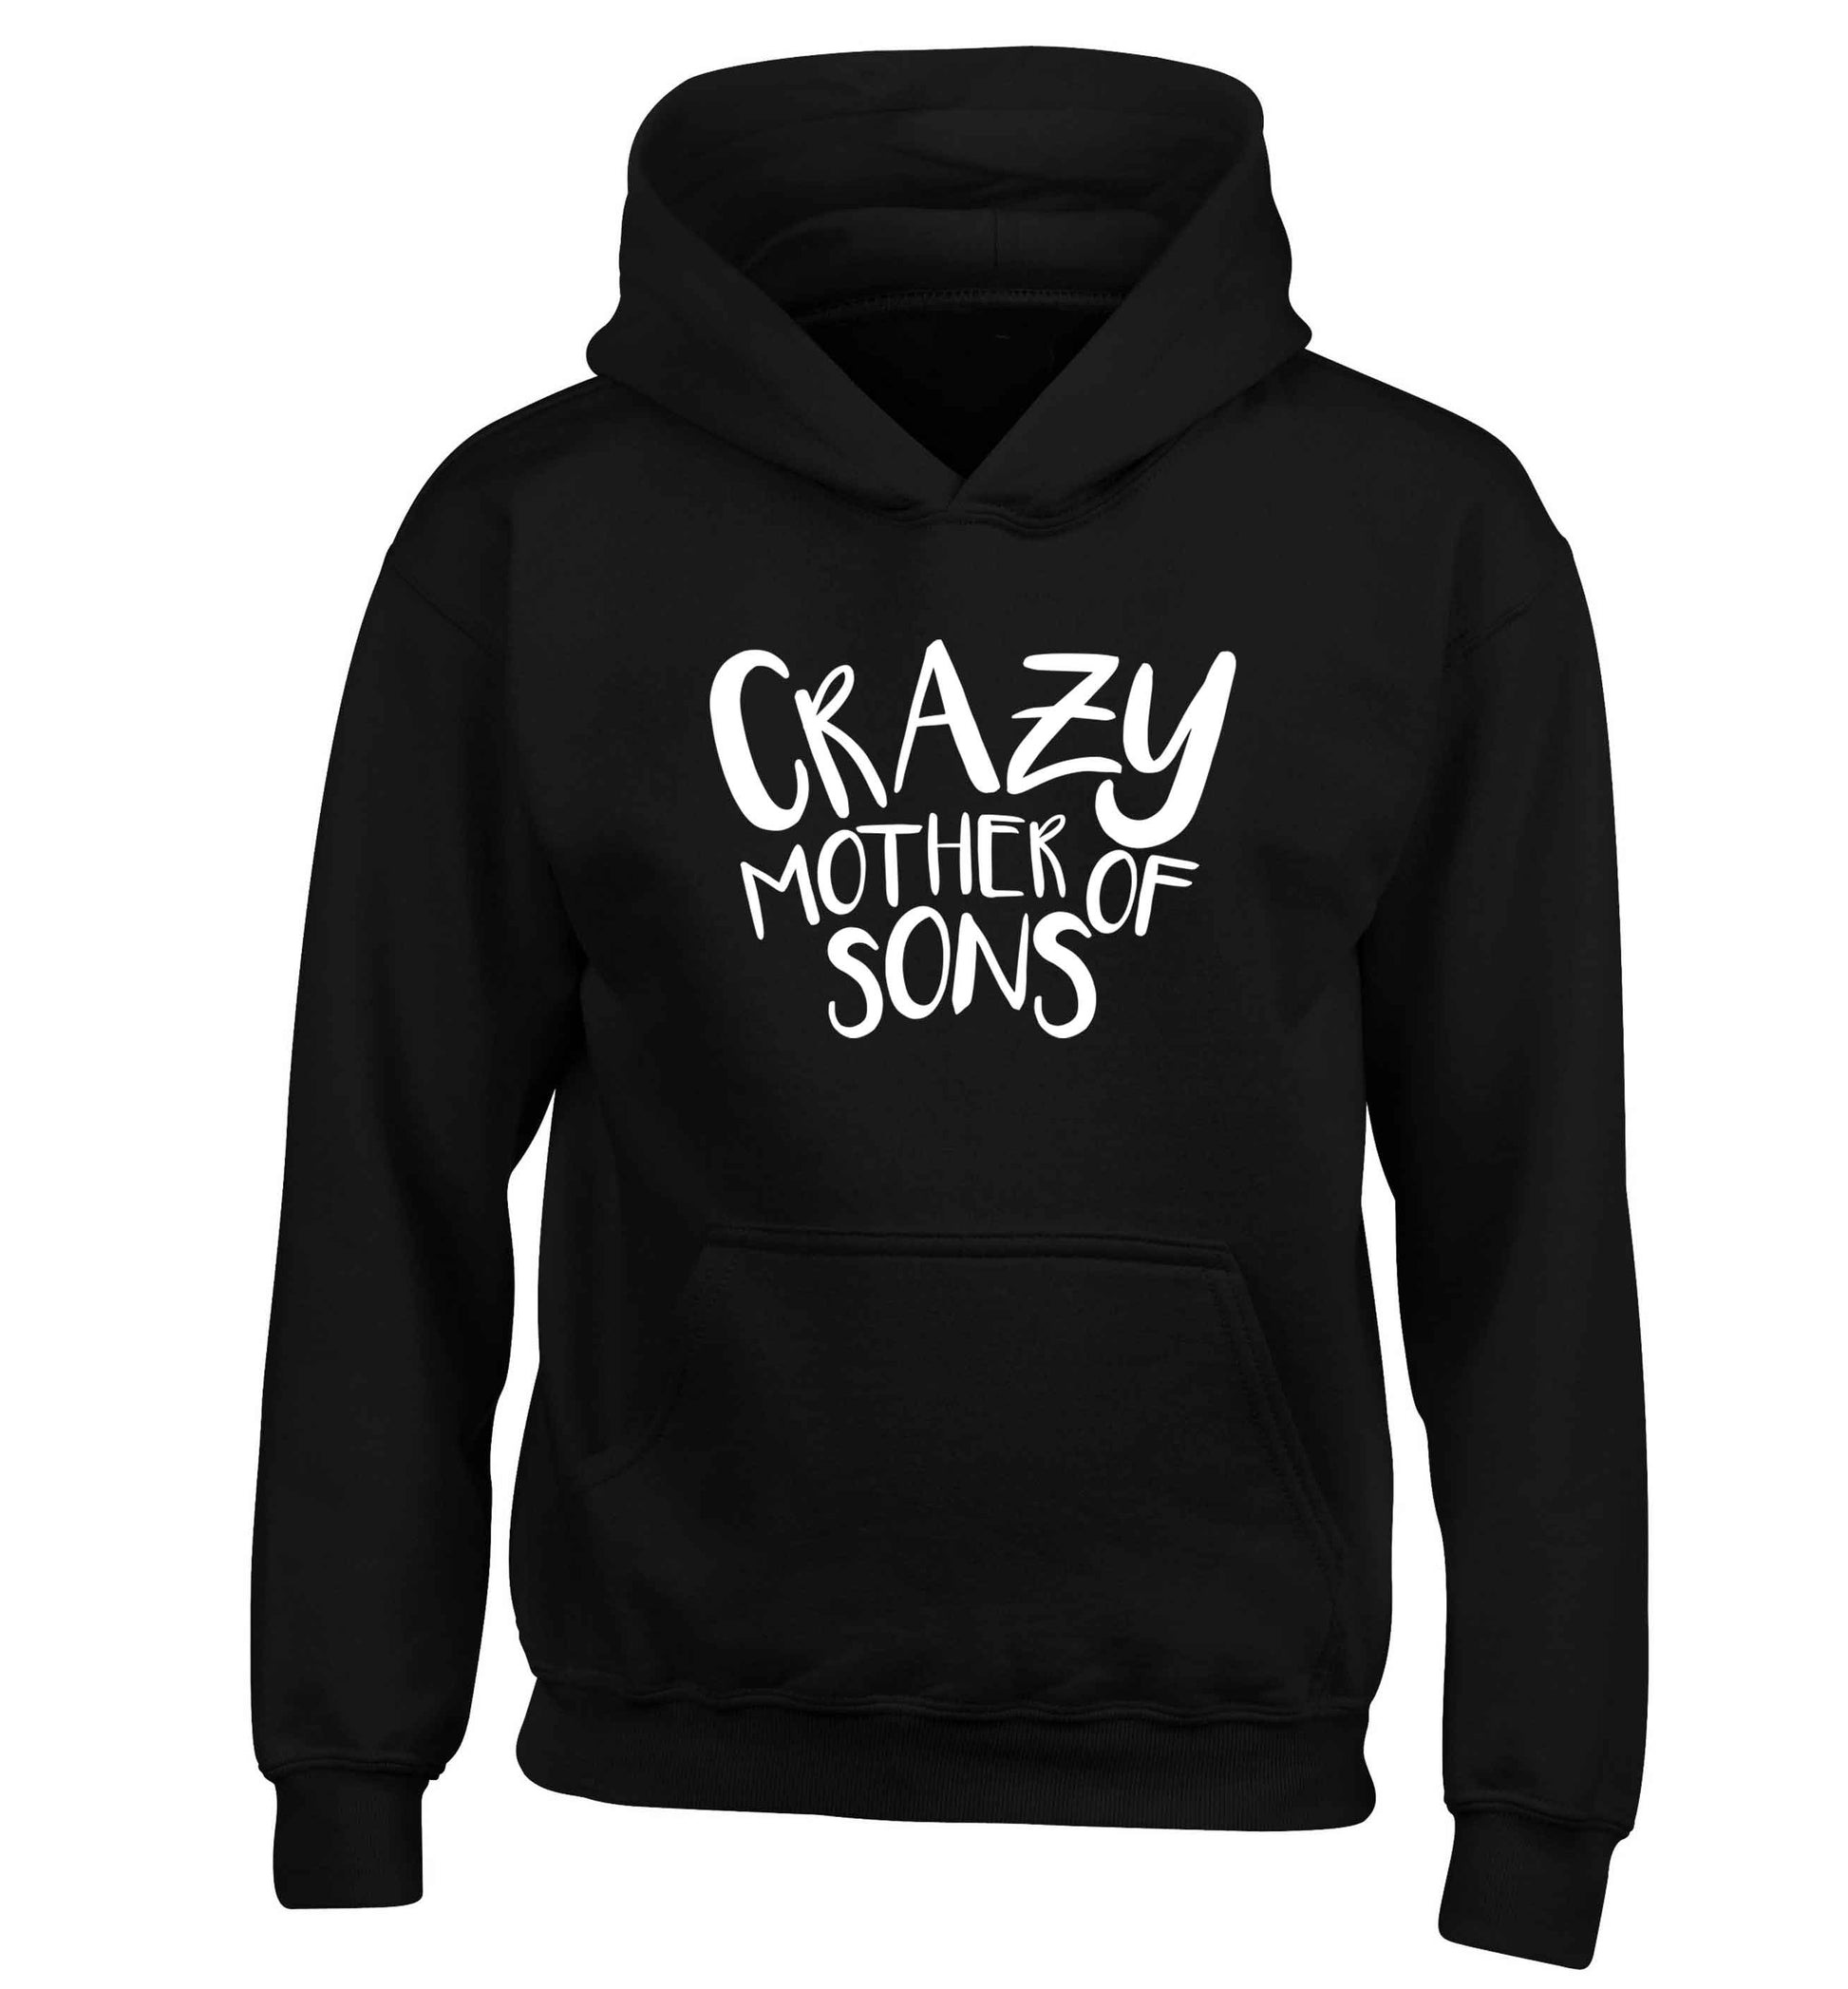 Crazy mother of sons children's black hoodie 12-13 Years